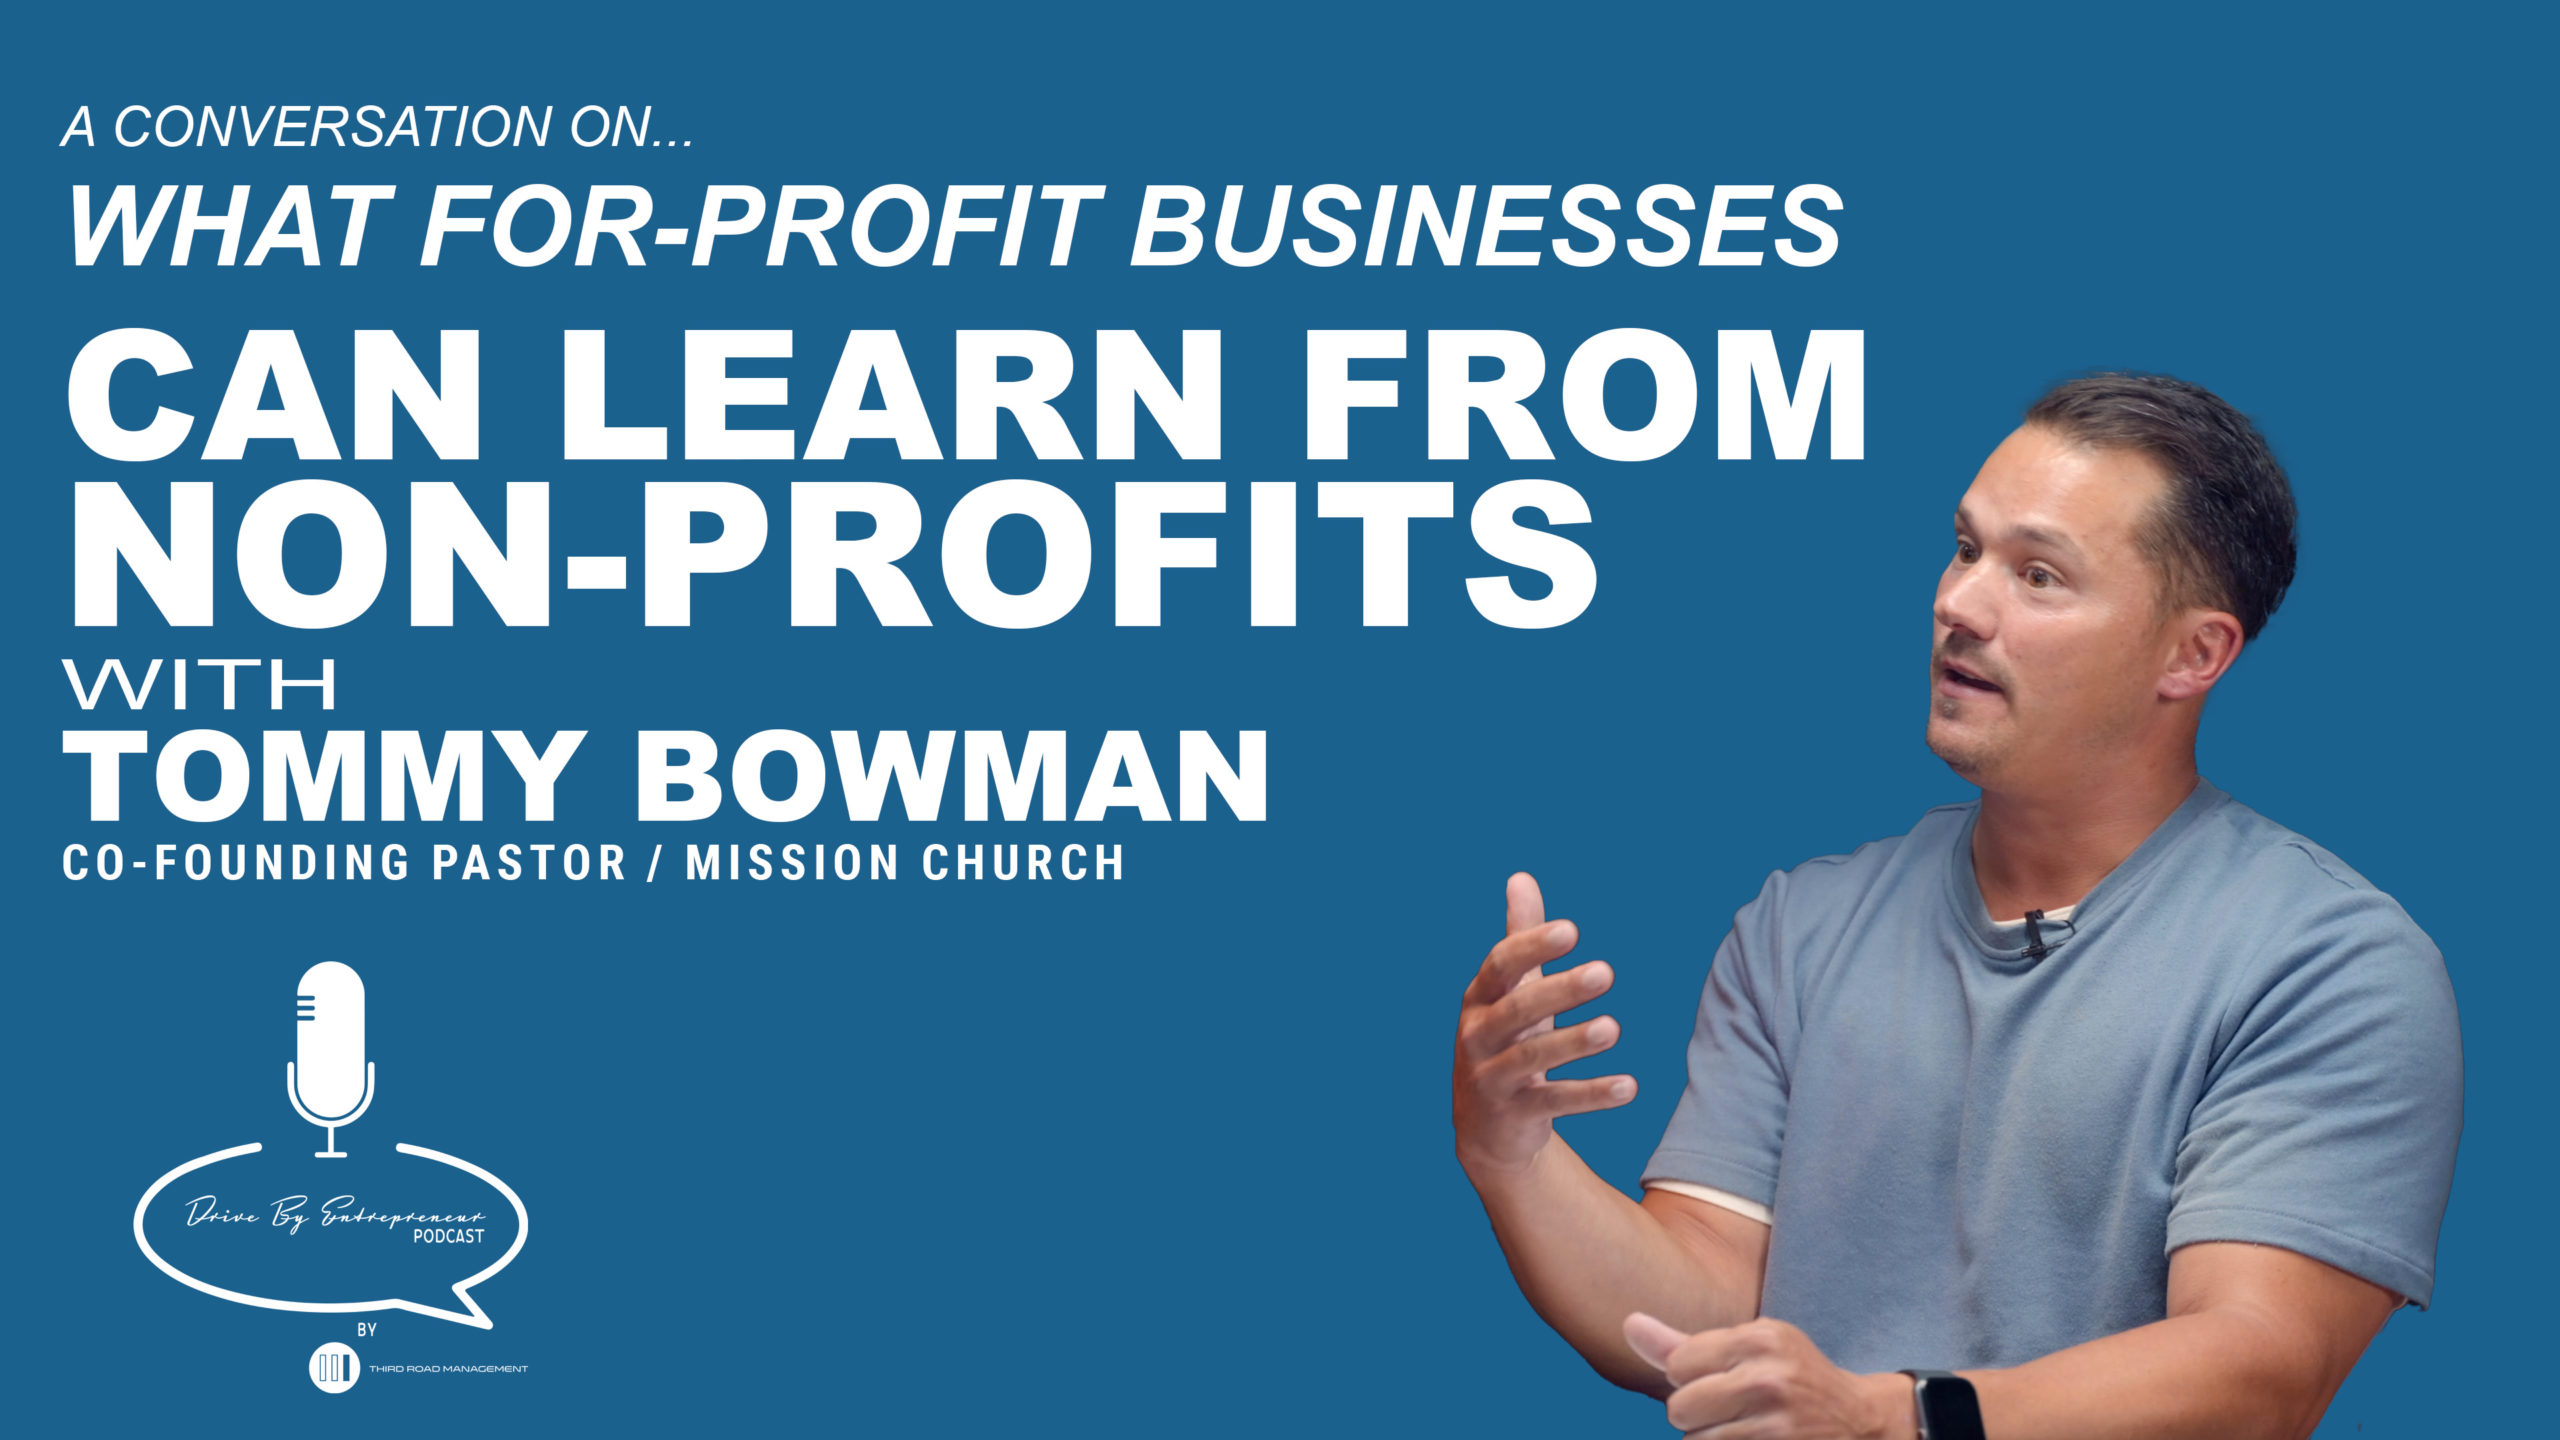 What For-Profits Can Learn From Non-Profits – Drive By Entrepreneur Podcast S1E2